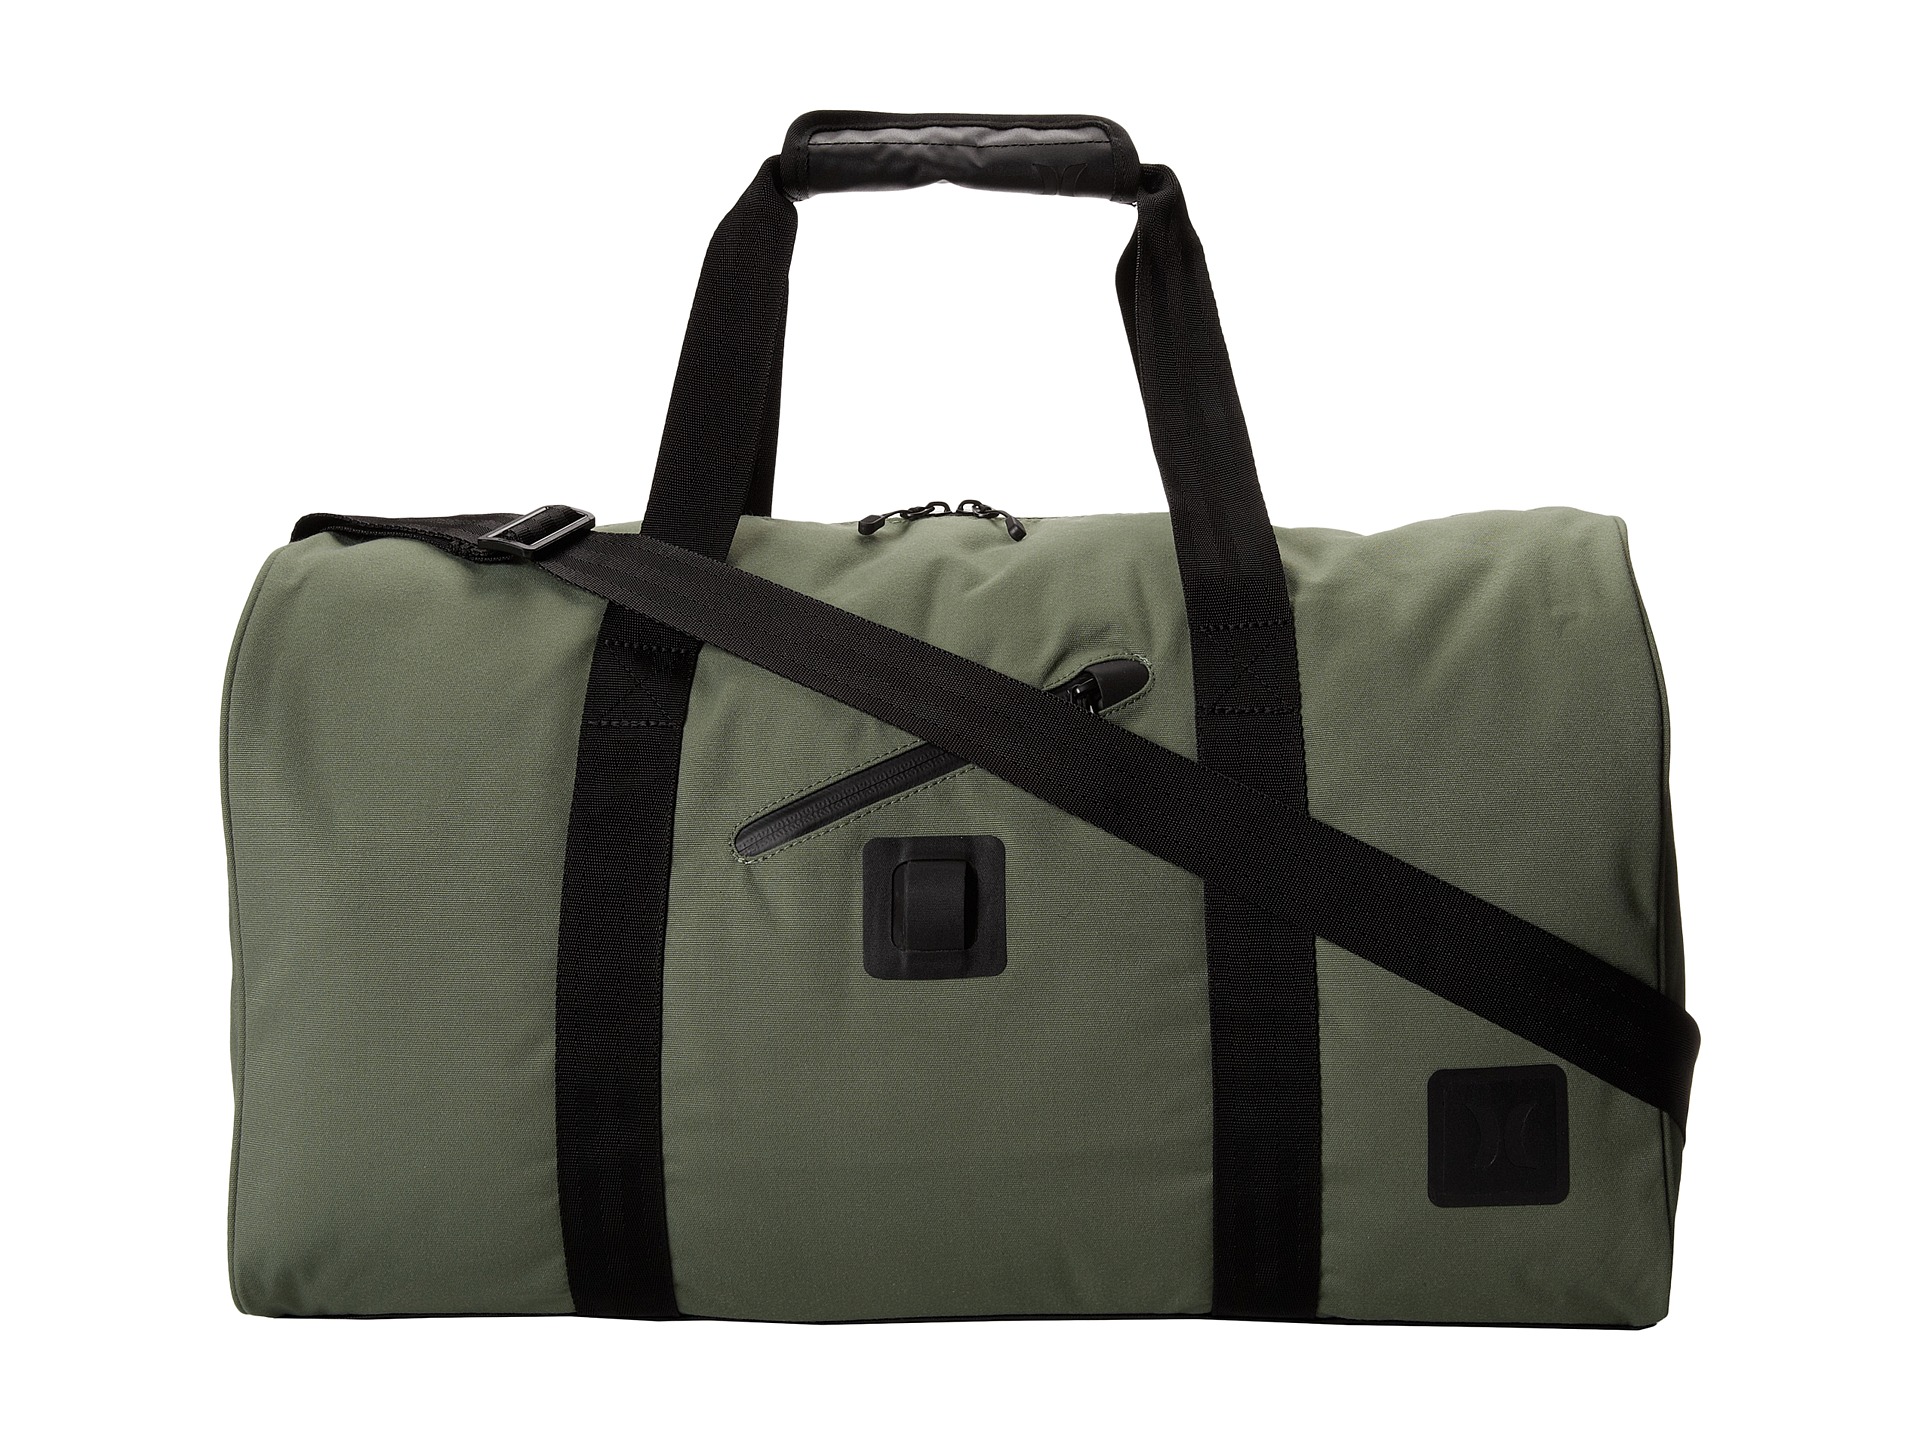 Hurley State Duffel Bag Combat Hurley | Shipped Free at Zappos